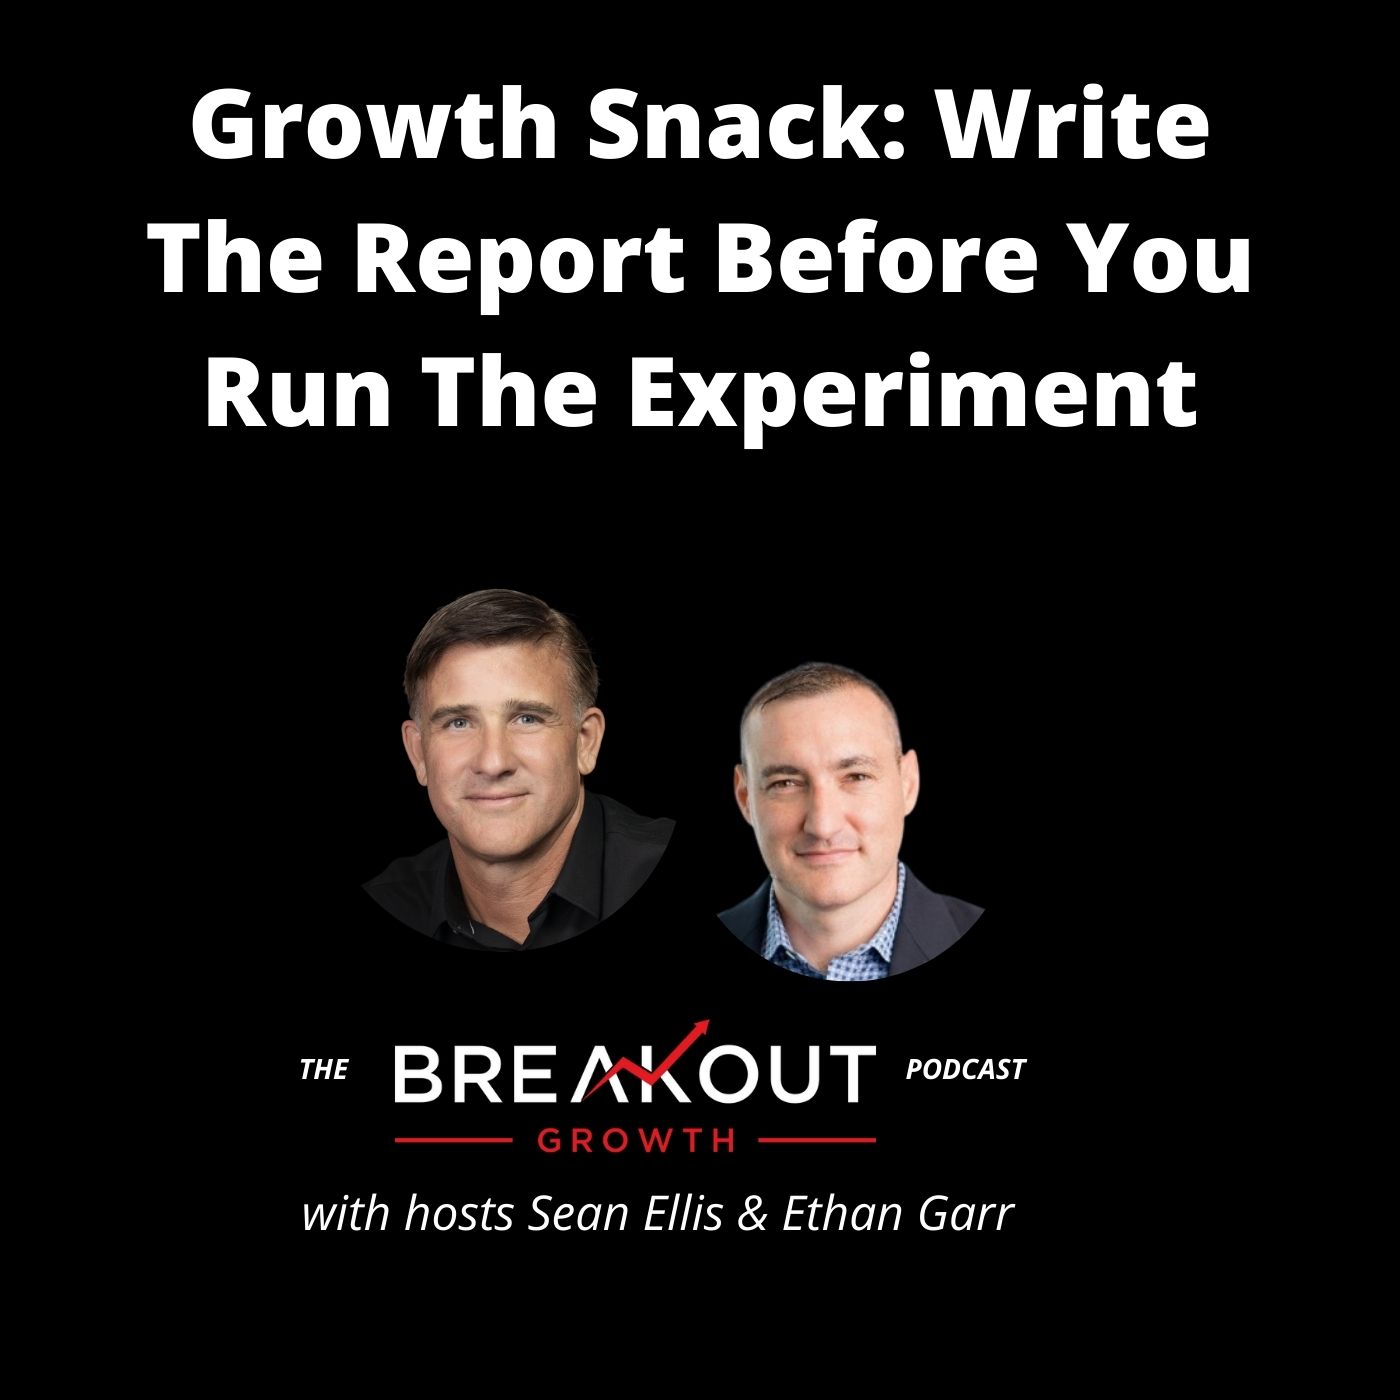 Growth Snack: Write the Report Before You Run the Experiment